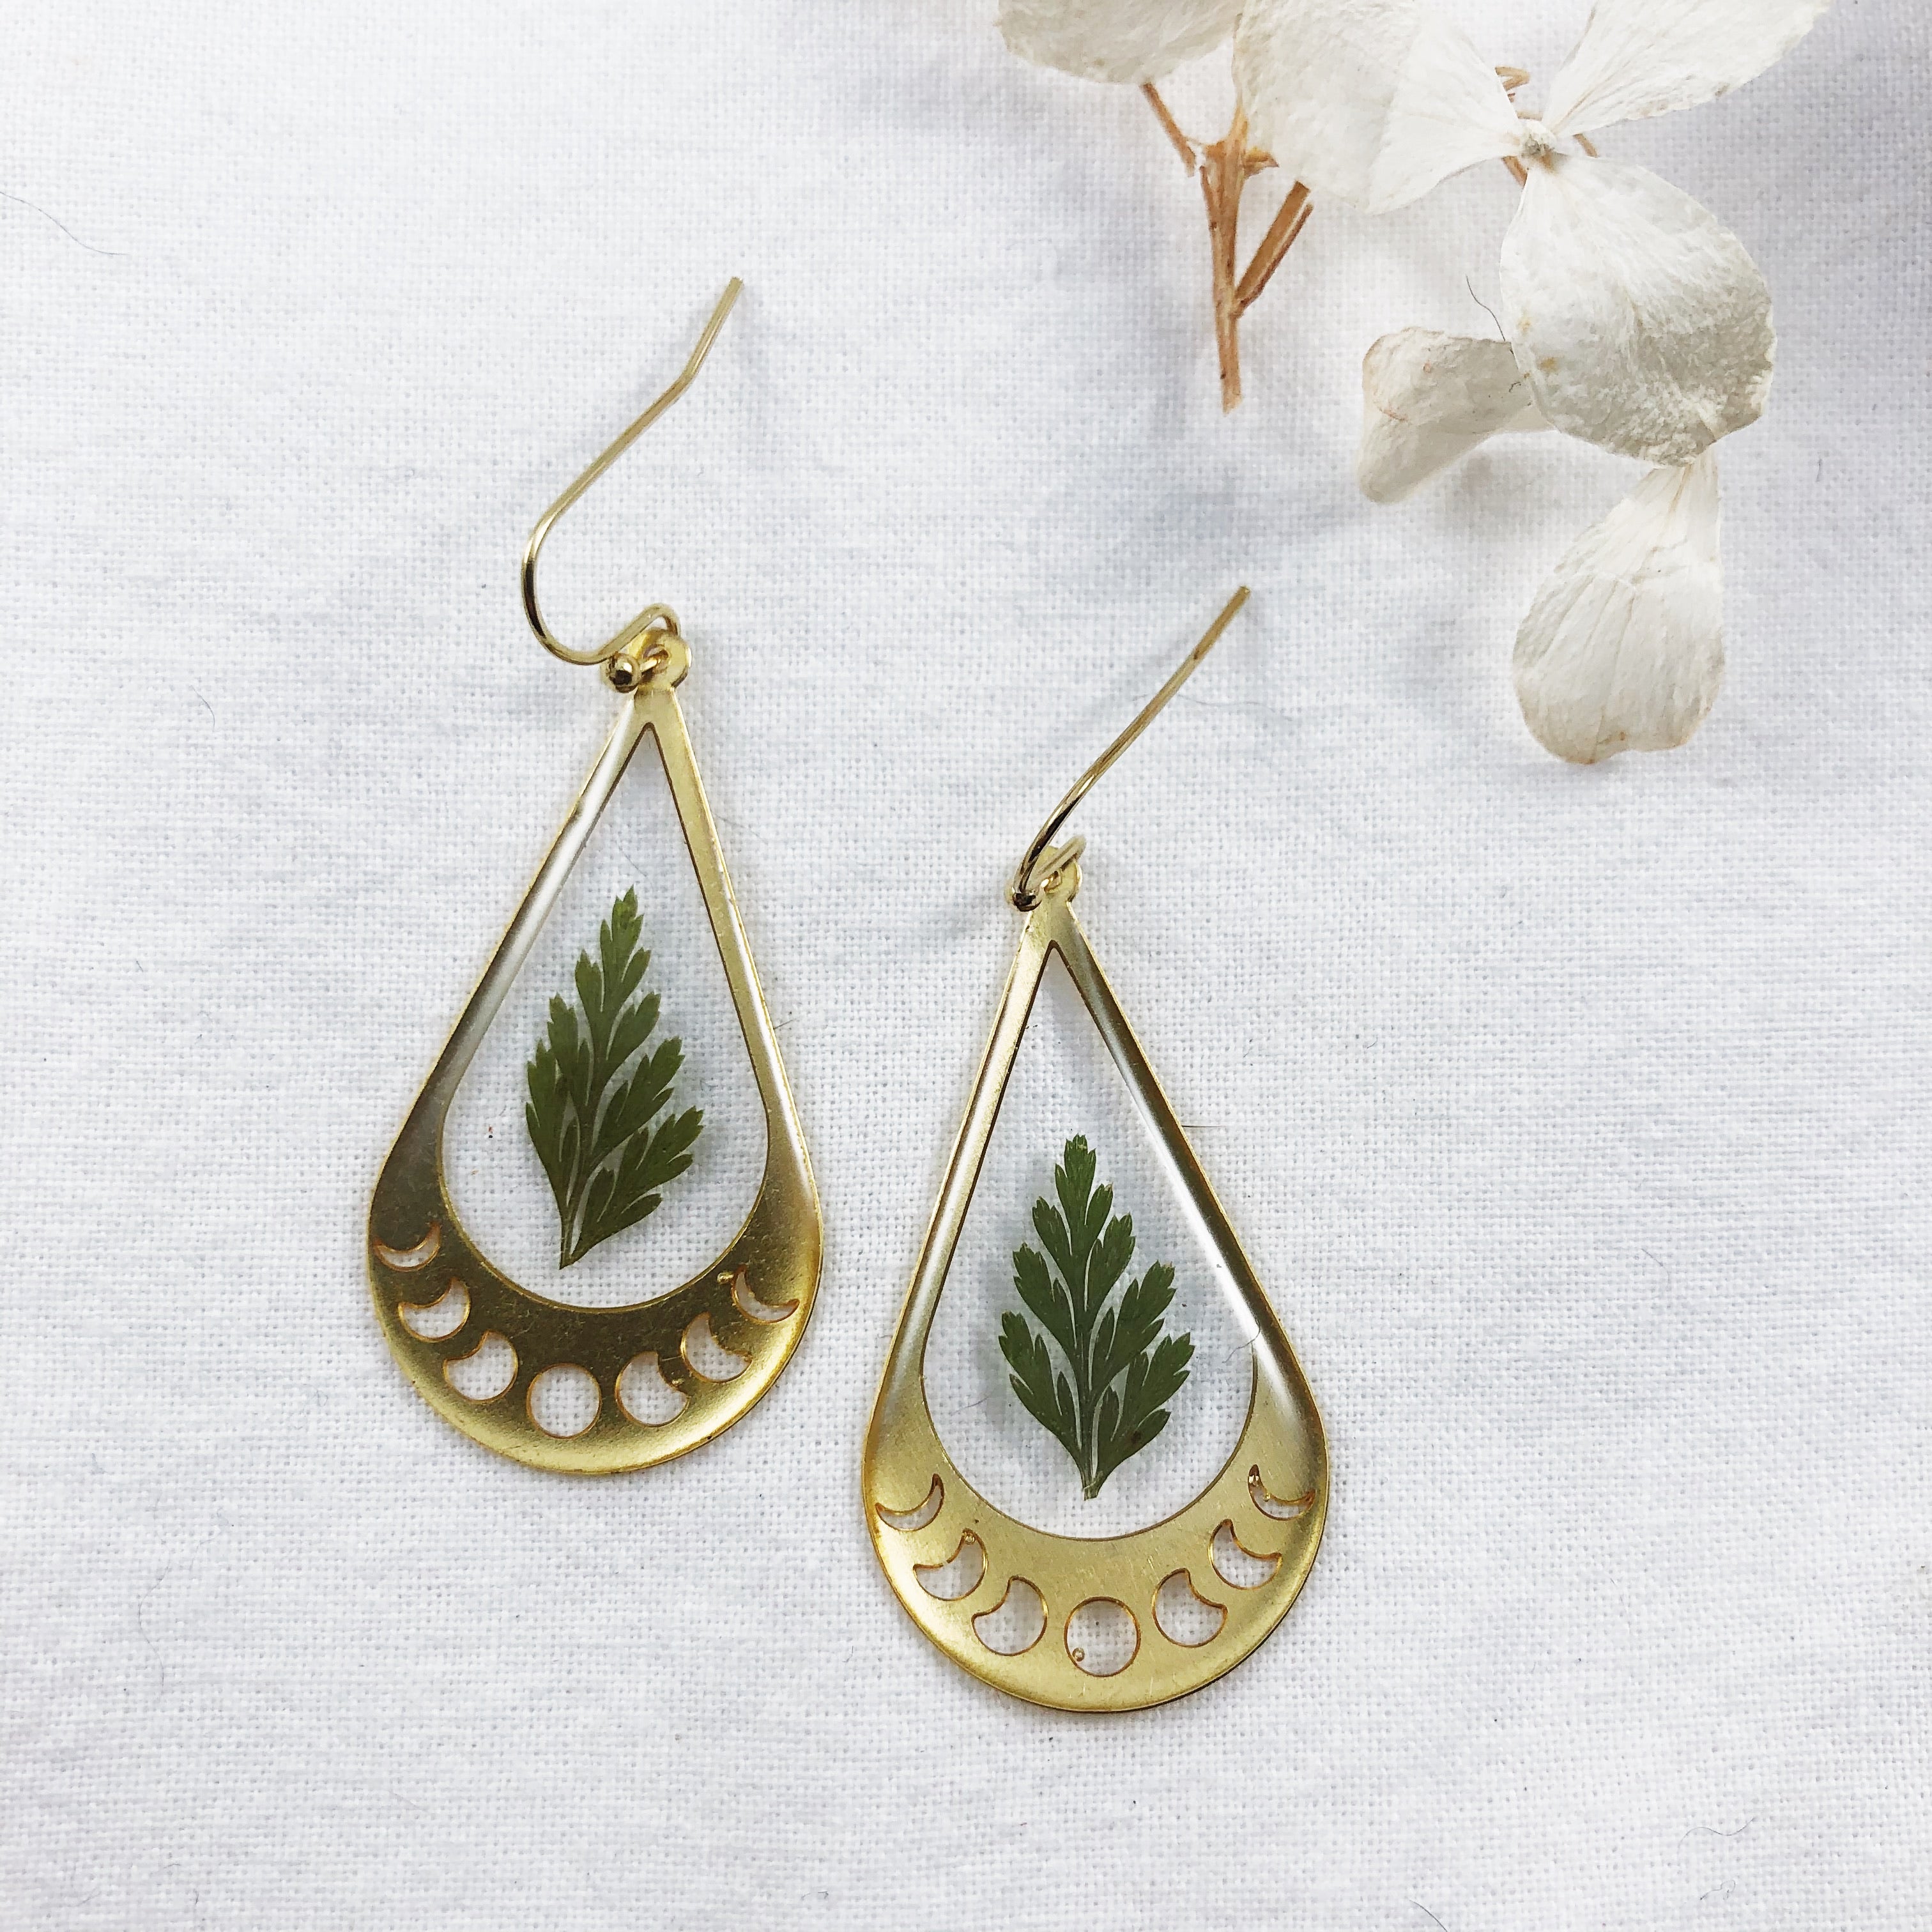 Brass Moon Phase Earrings with Preserved Ferns